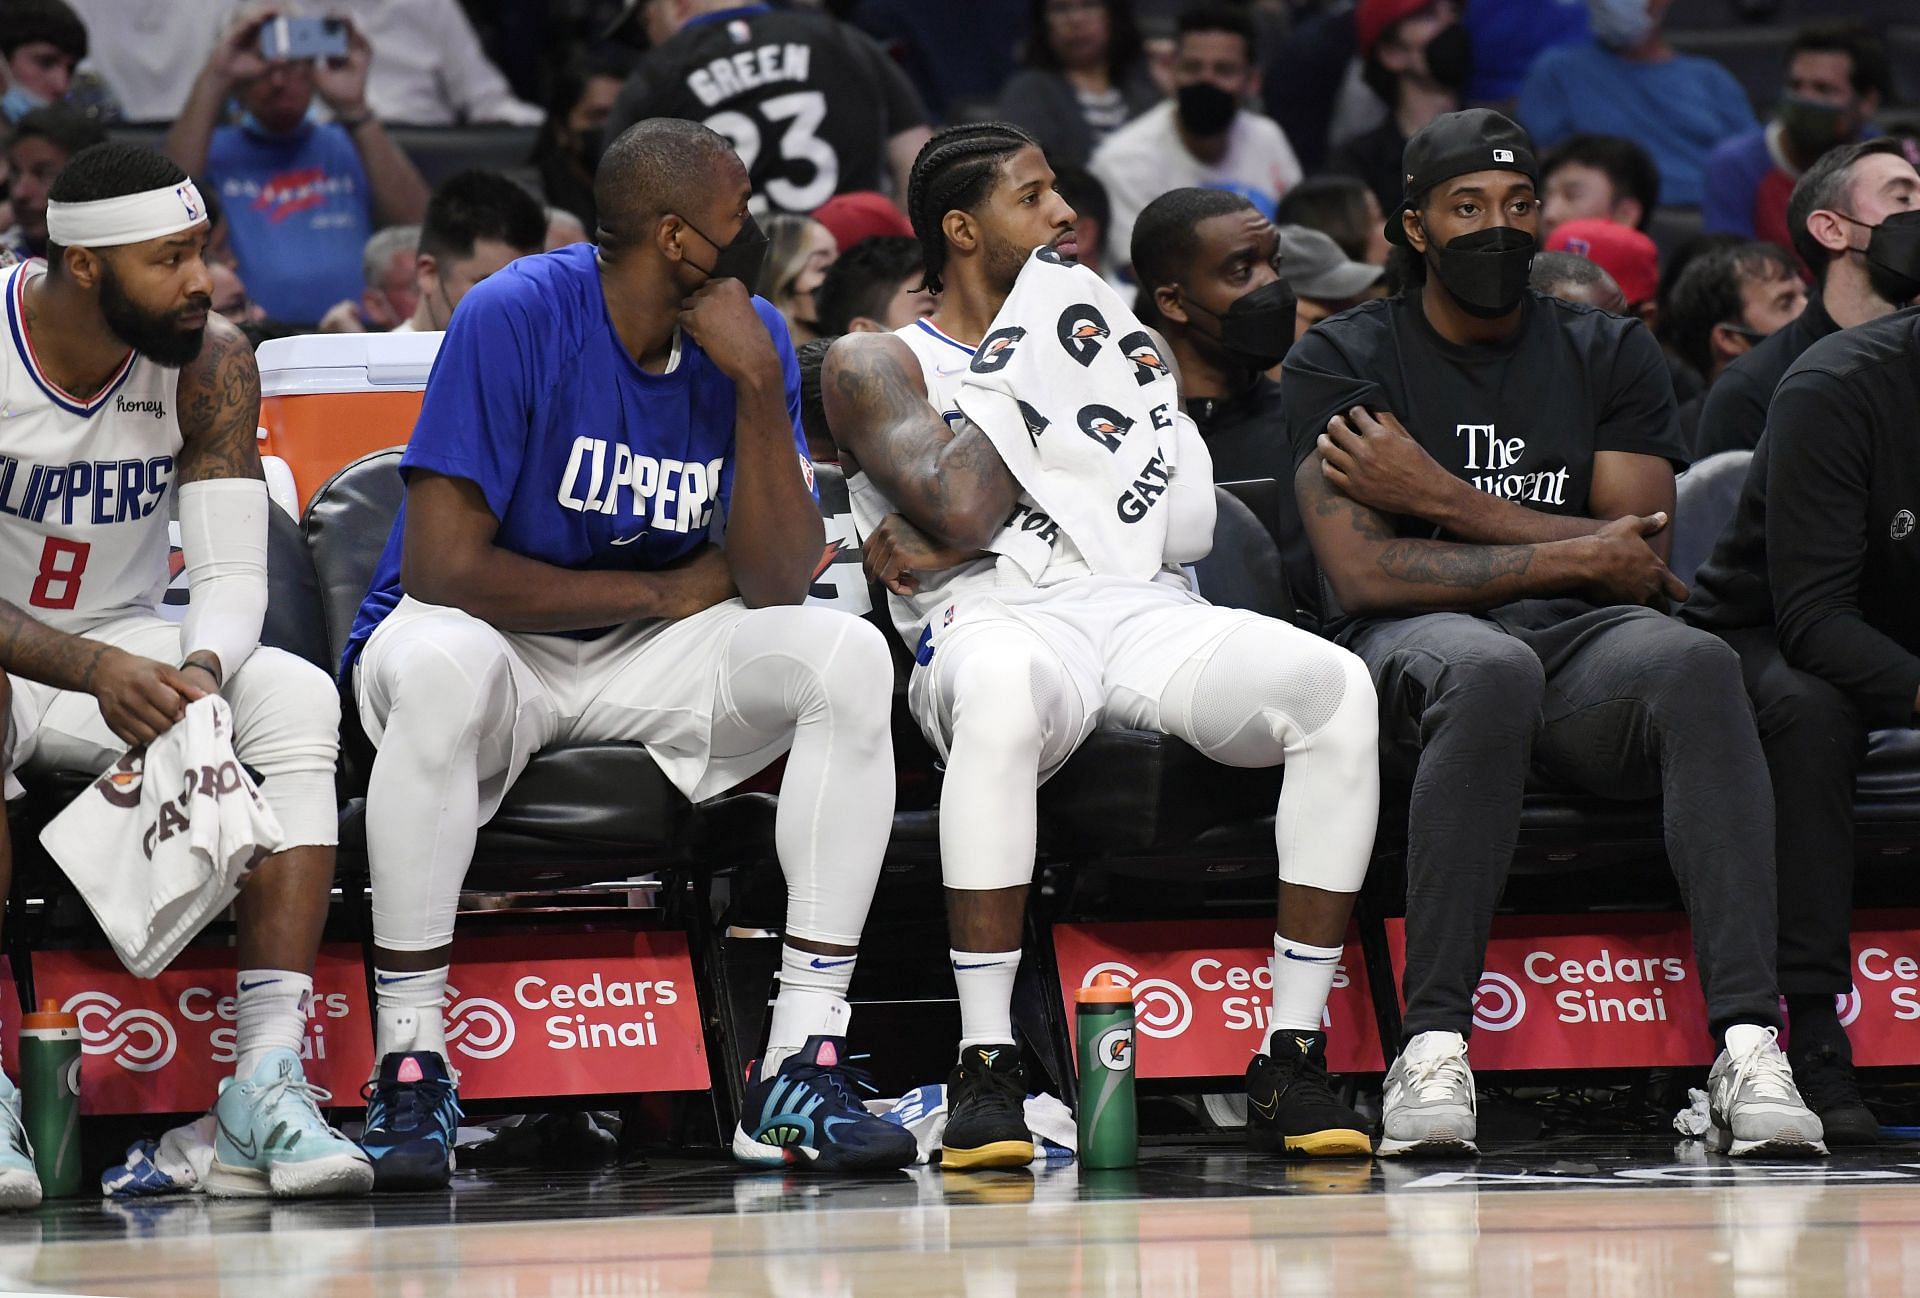 Paul George and Kawhi Leonard of the LA Clippers are on the bench